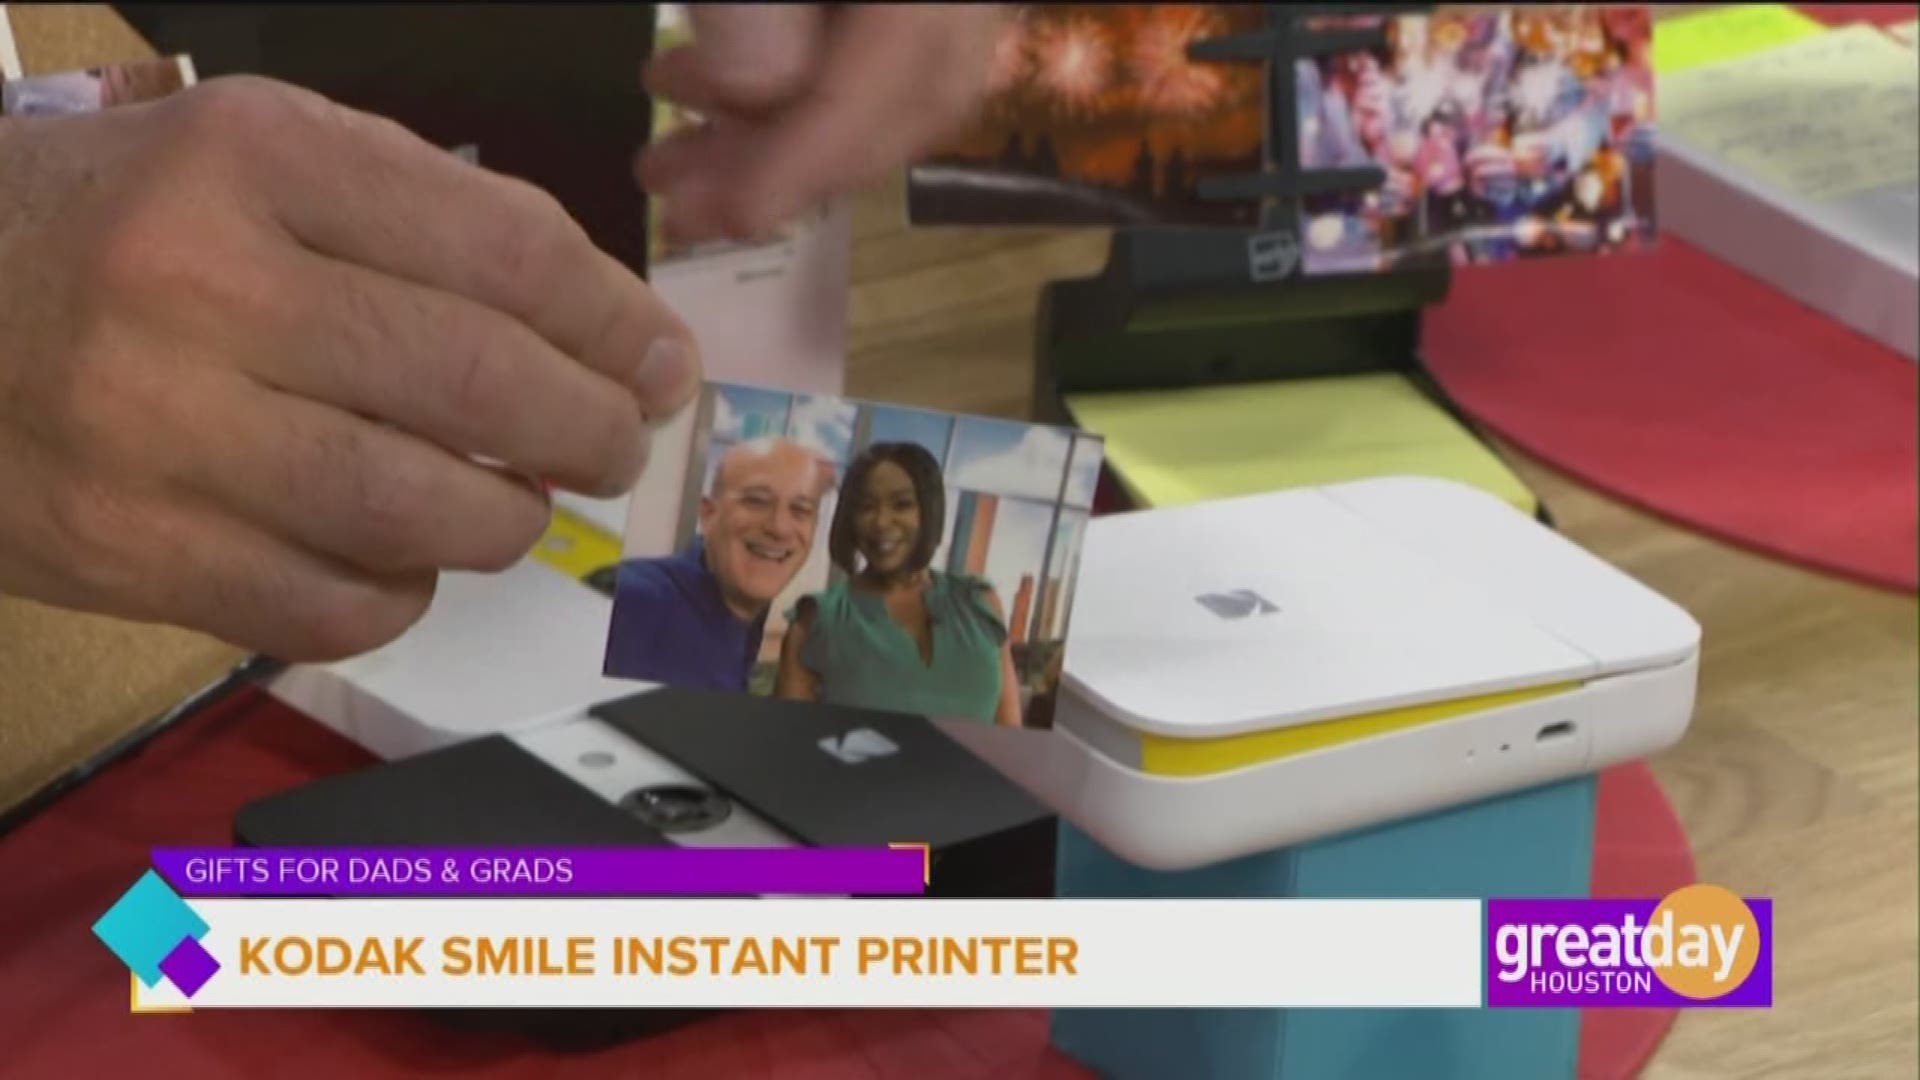 Steve Greenberg shows off cool tech gifts for dads and grads.